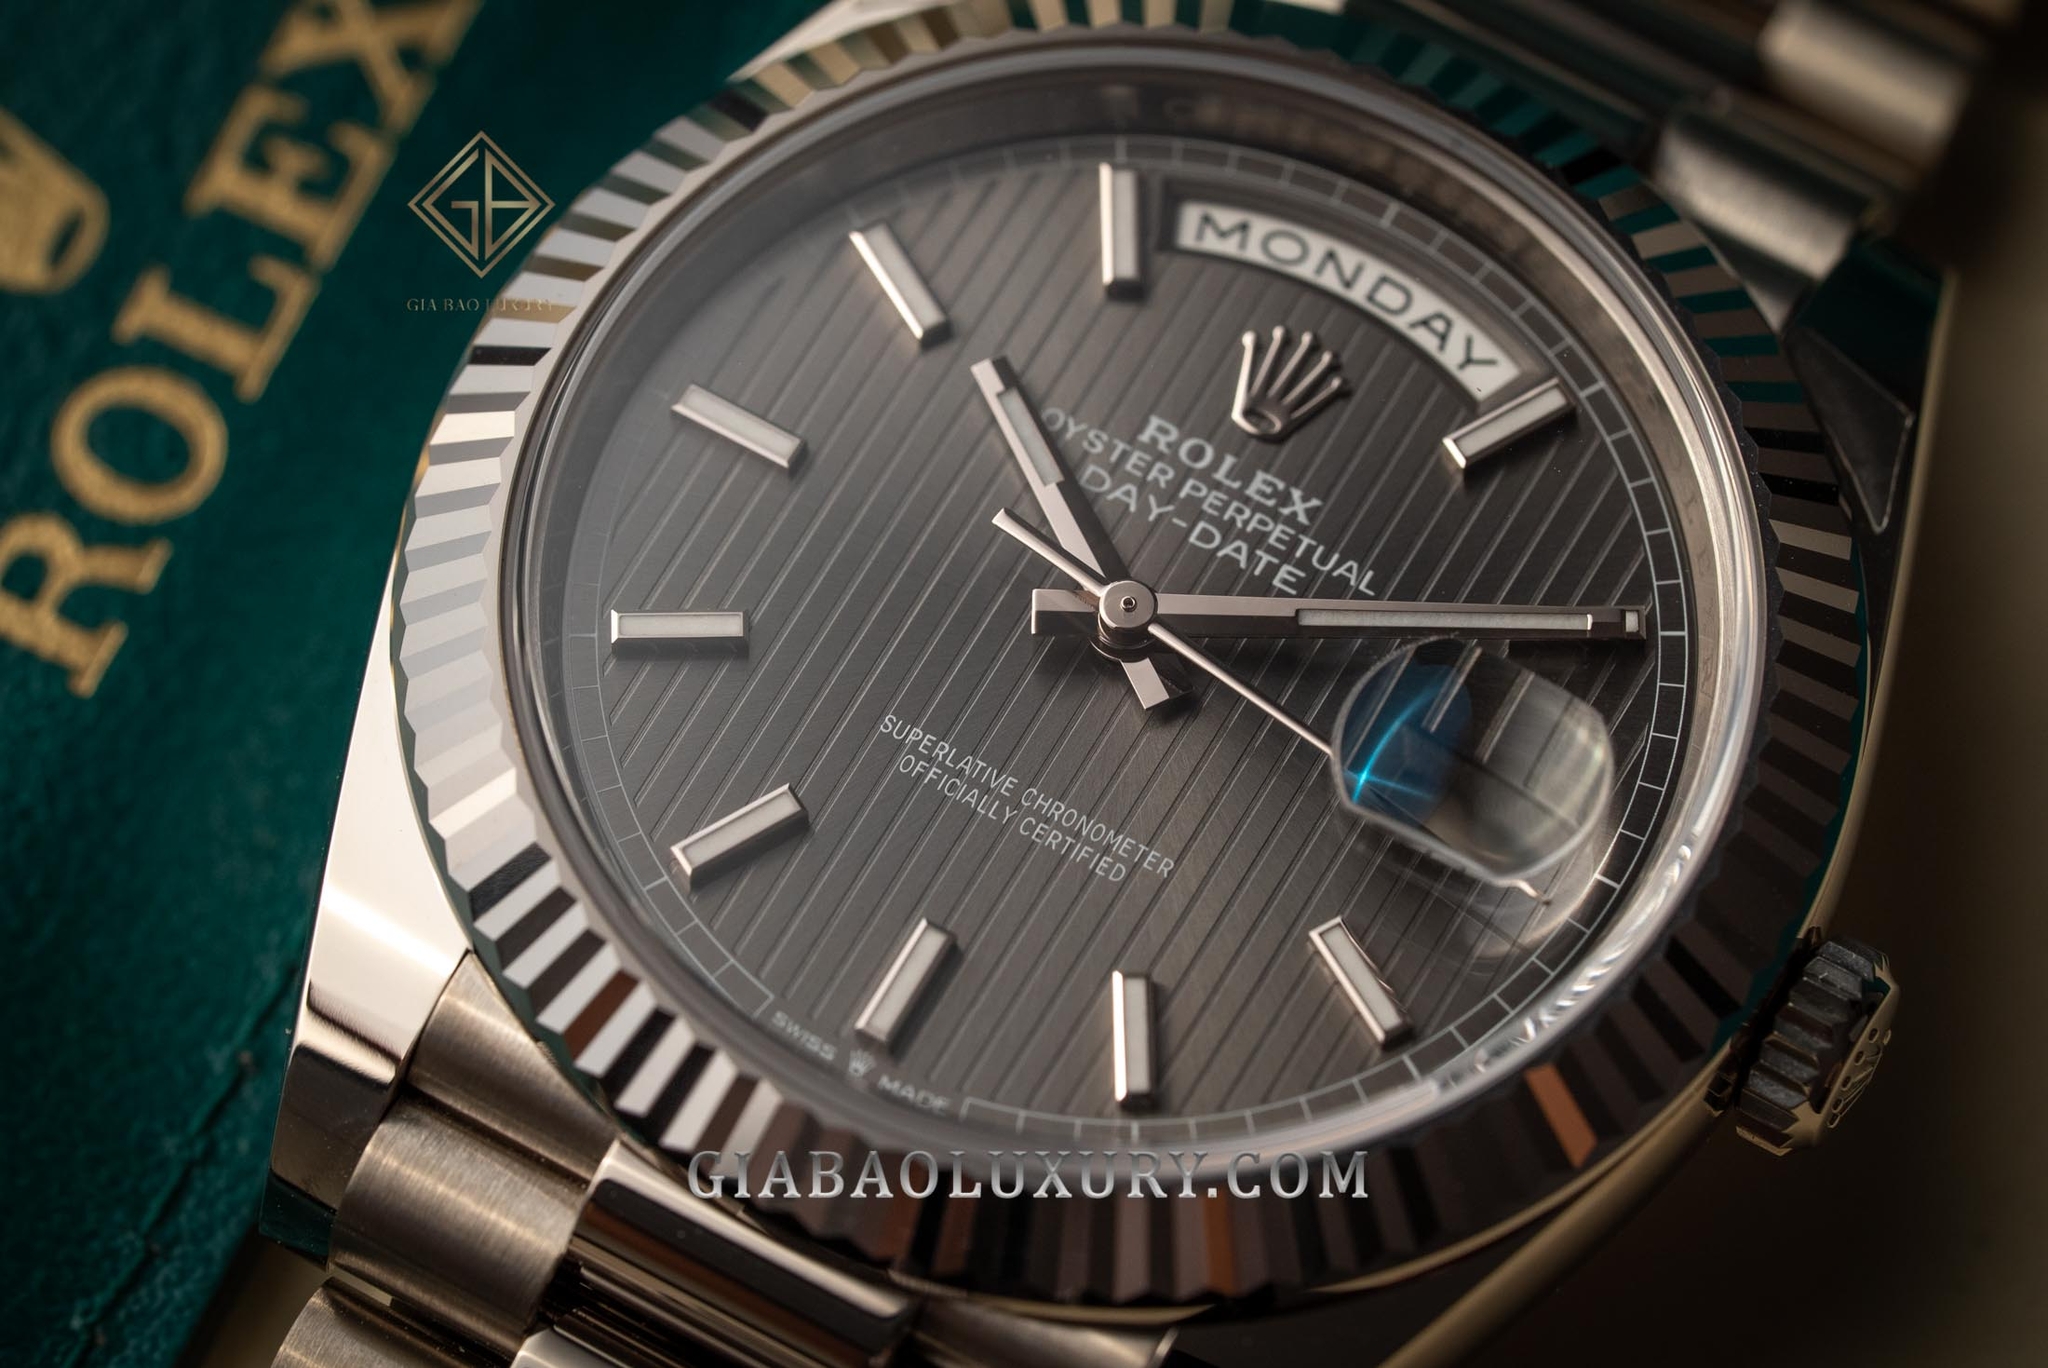 Review Äá»ng há» Rolex Day-Date 228239 Máº·t sá» Rhodium káº» sá»c